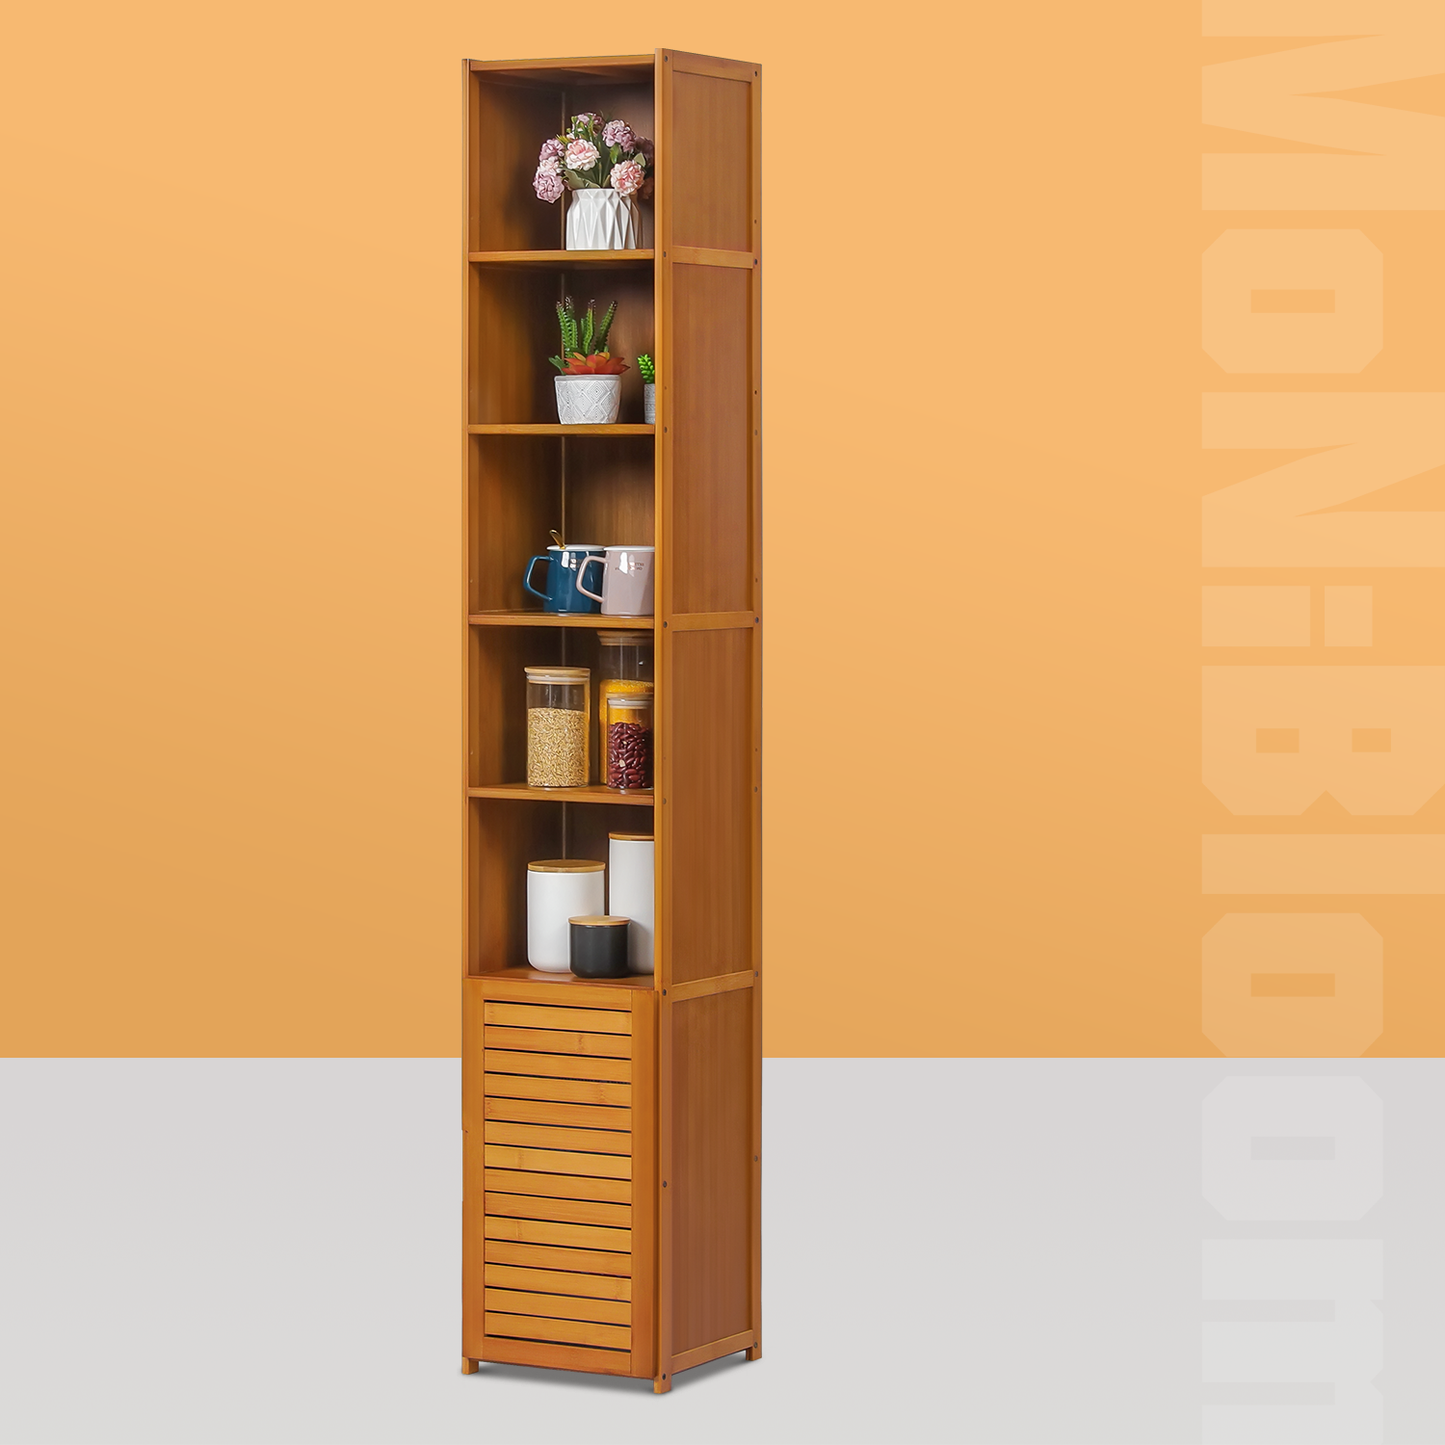 Multi-Functional Storage Organizer - with Louver Panel Cabinet Door at Bottom